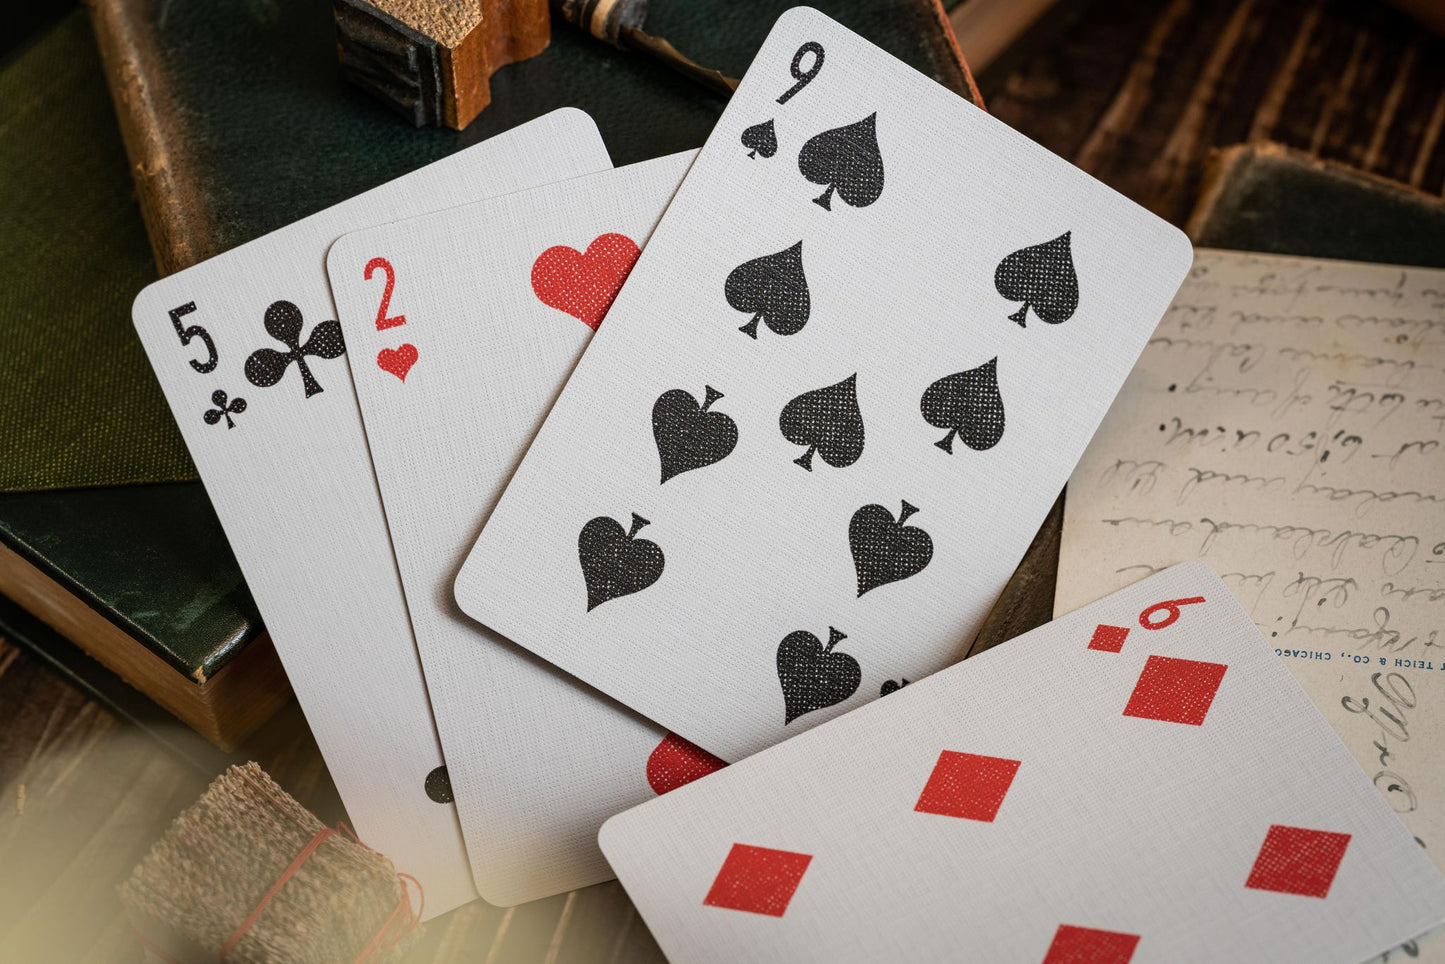 Imported Playing Cards. Image shows, from left to right, 5 of Clubs, 2 of Hearts, 9 of Clubs and 6 of Diamonds. All hand drawn pips.